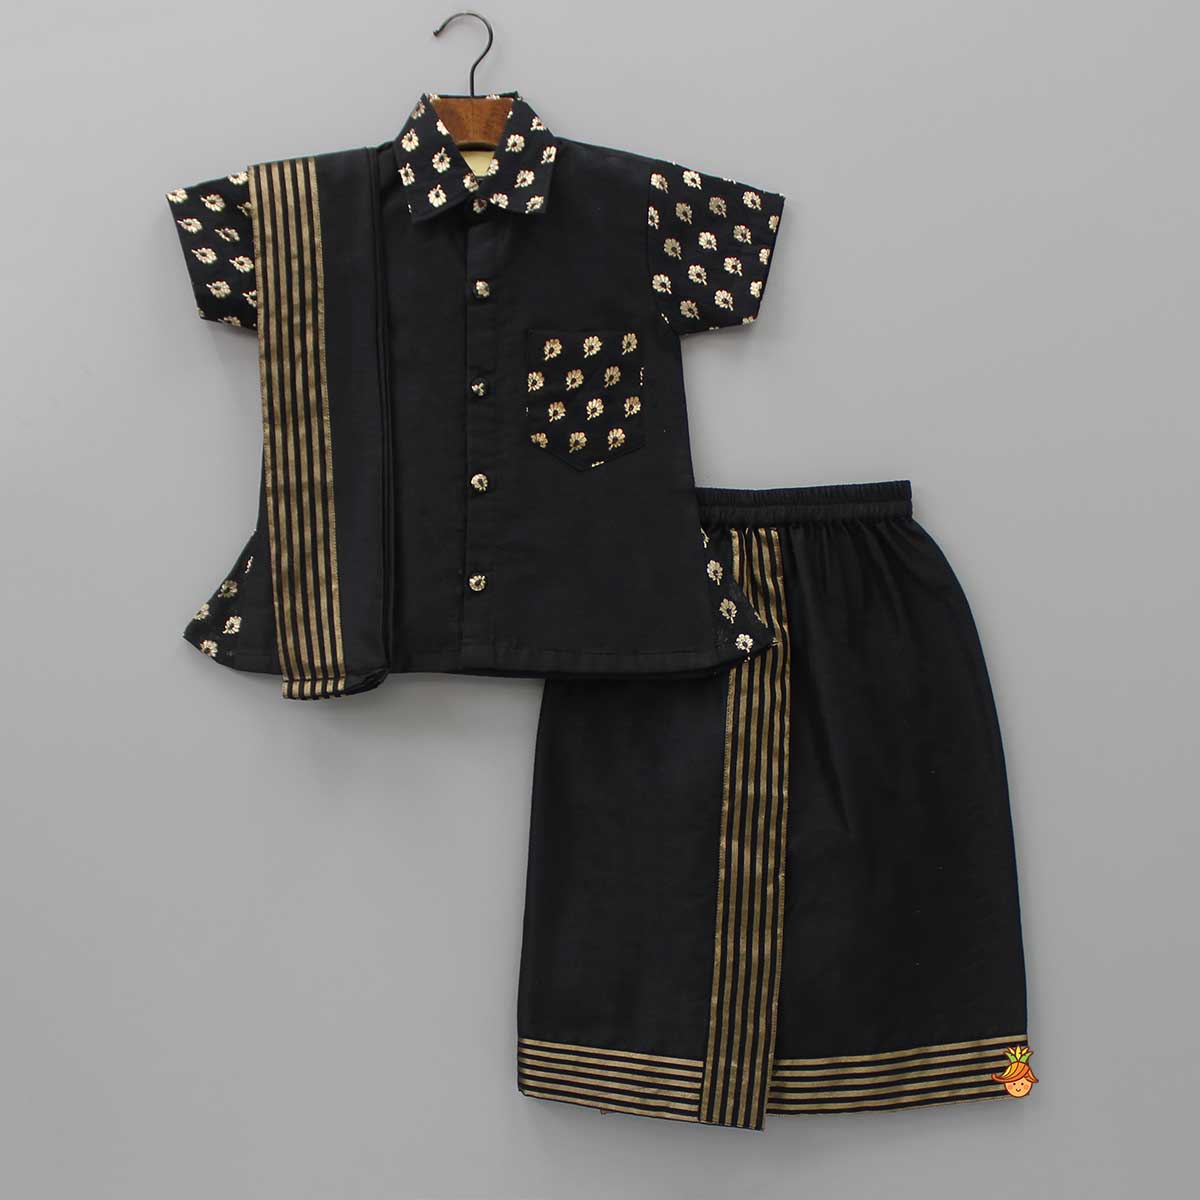 Exquisite Black Shirt And Stitched Lungi With Shawl